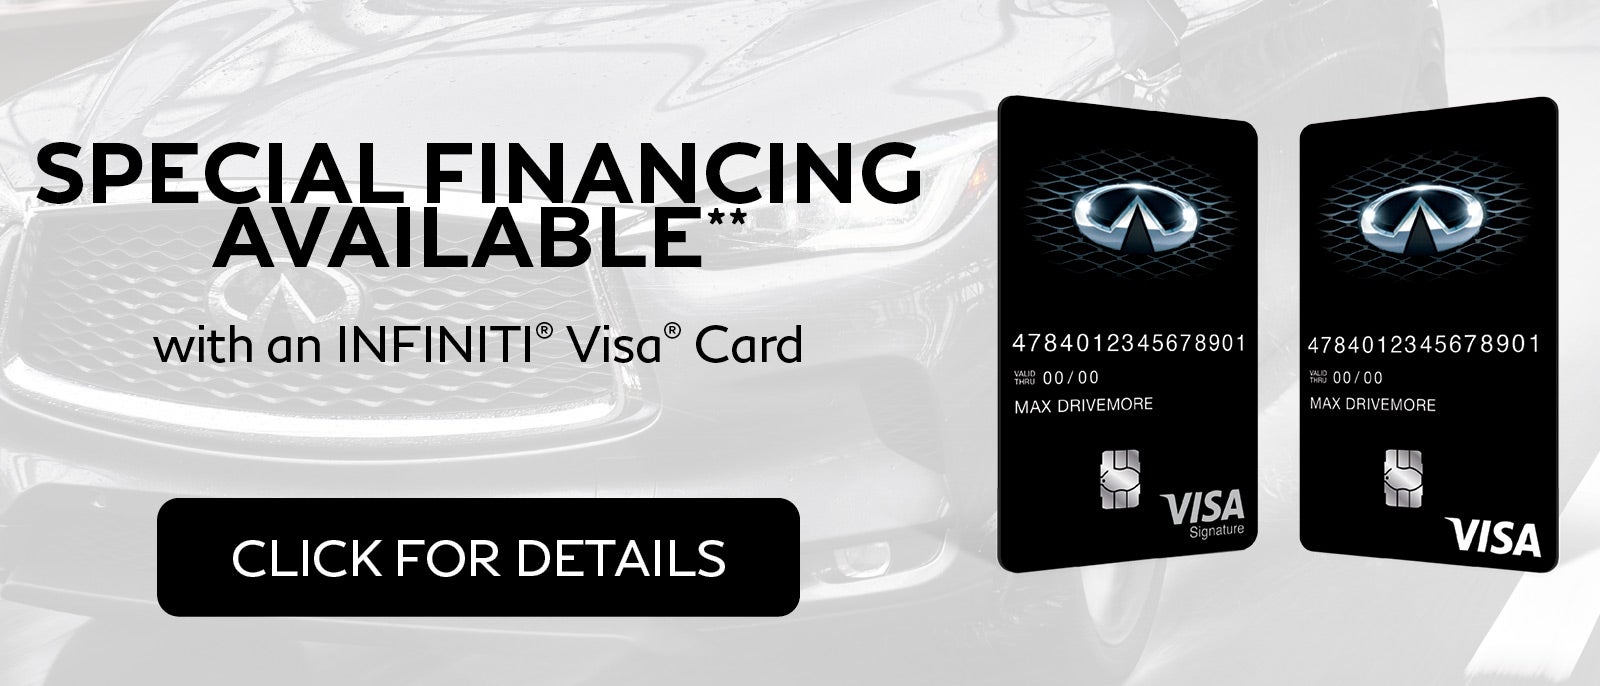 special financing available** with an INFINITI visa card. click for details.